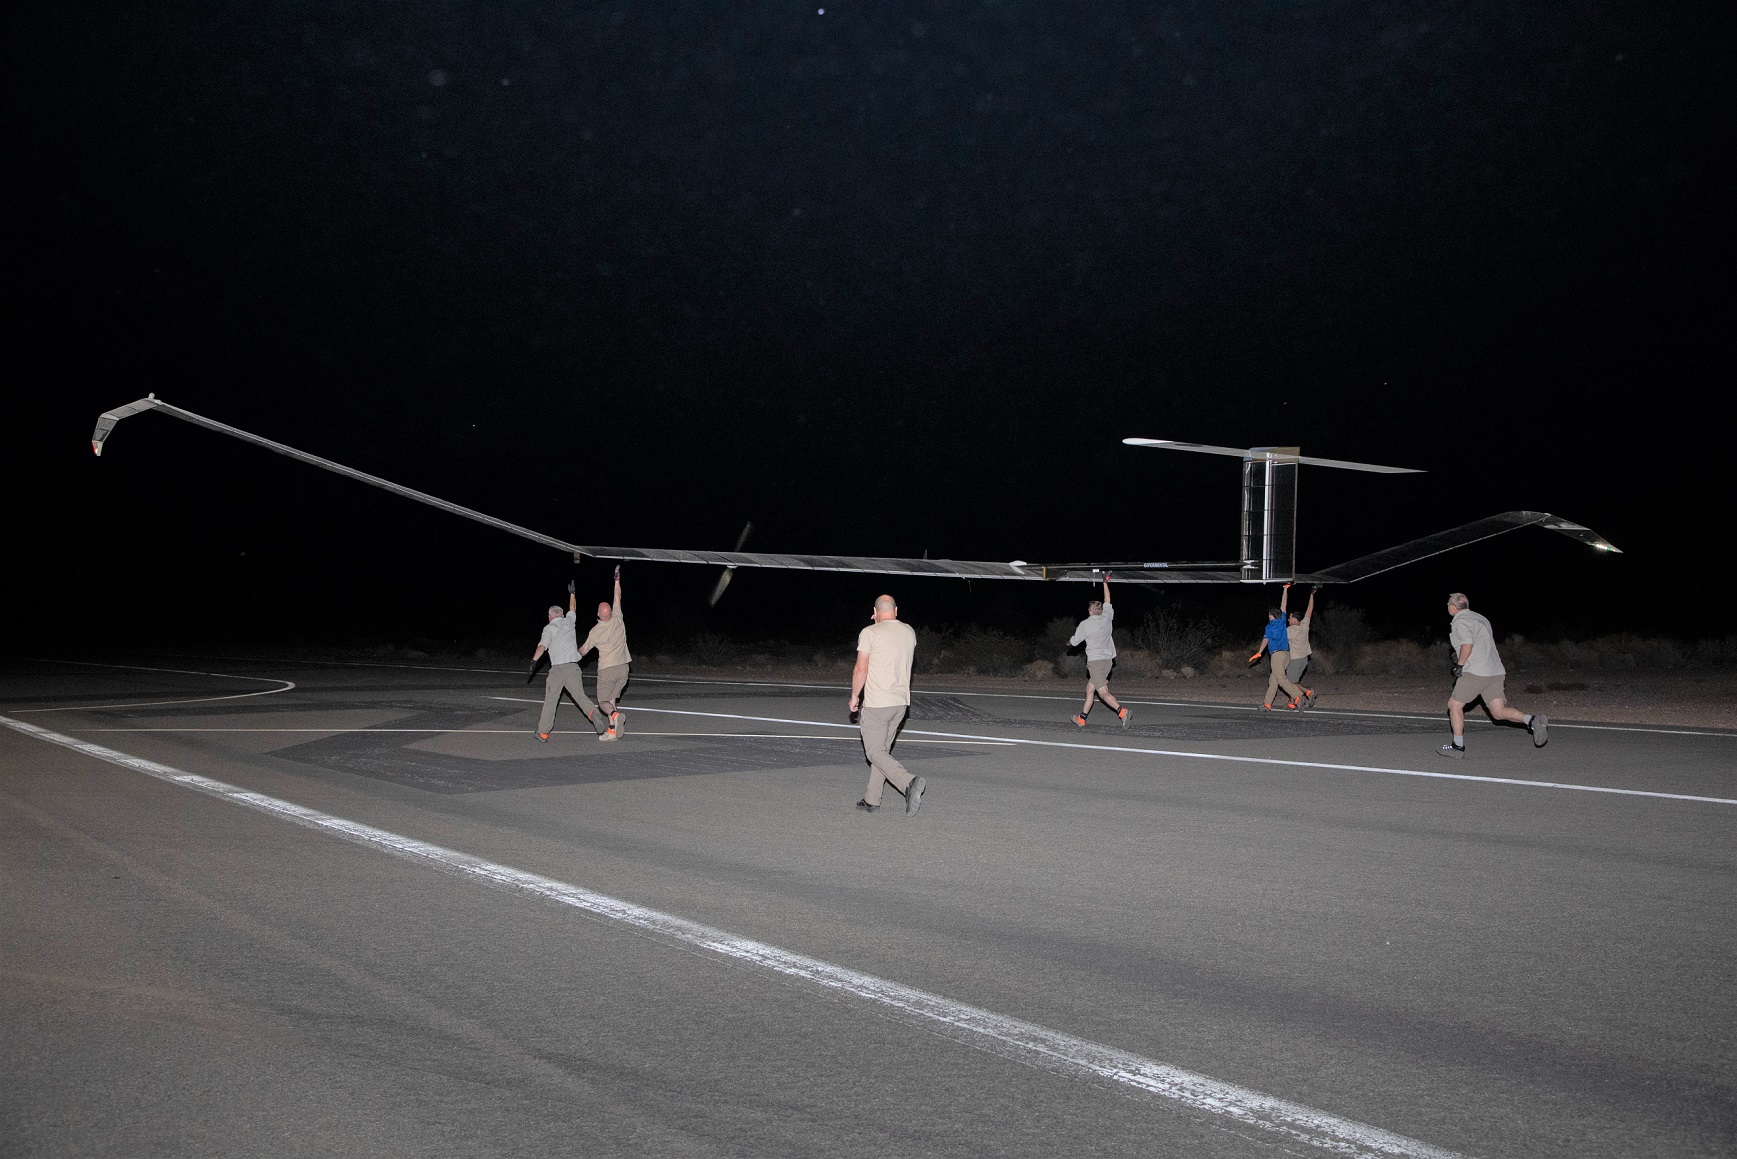 U.S. Army tests stratospheric drone, it flew over the Earth for 36 days